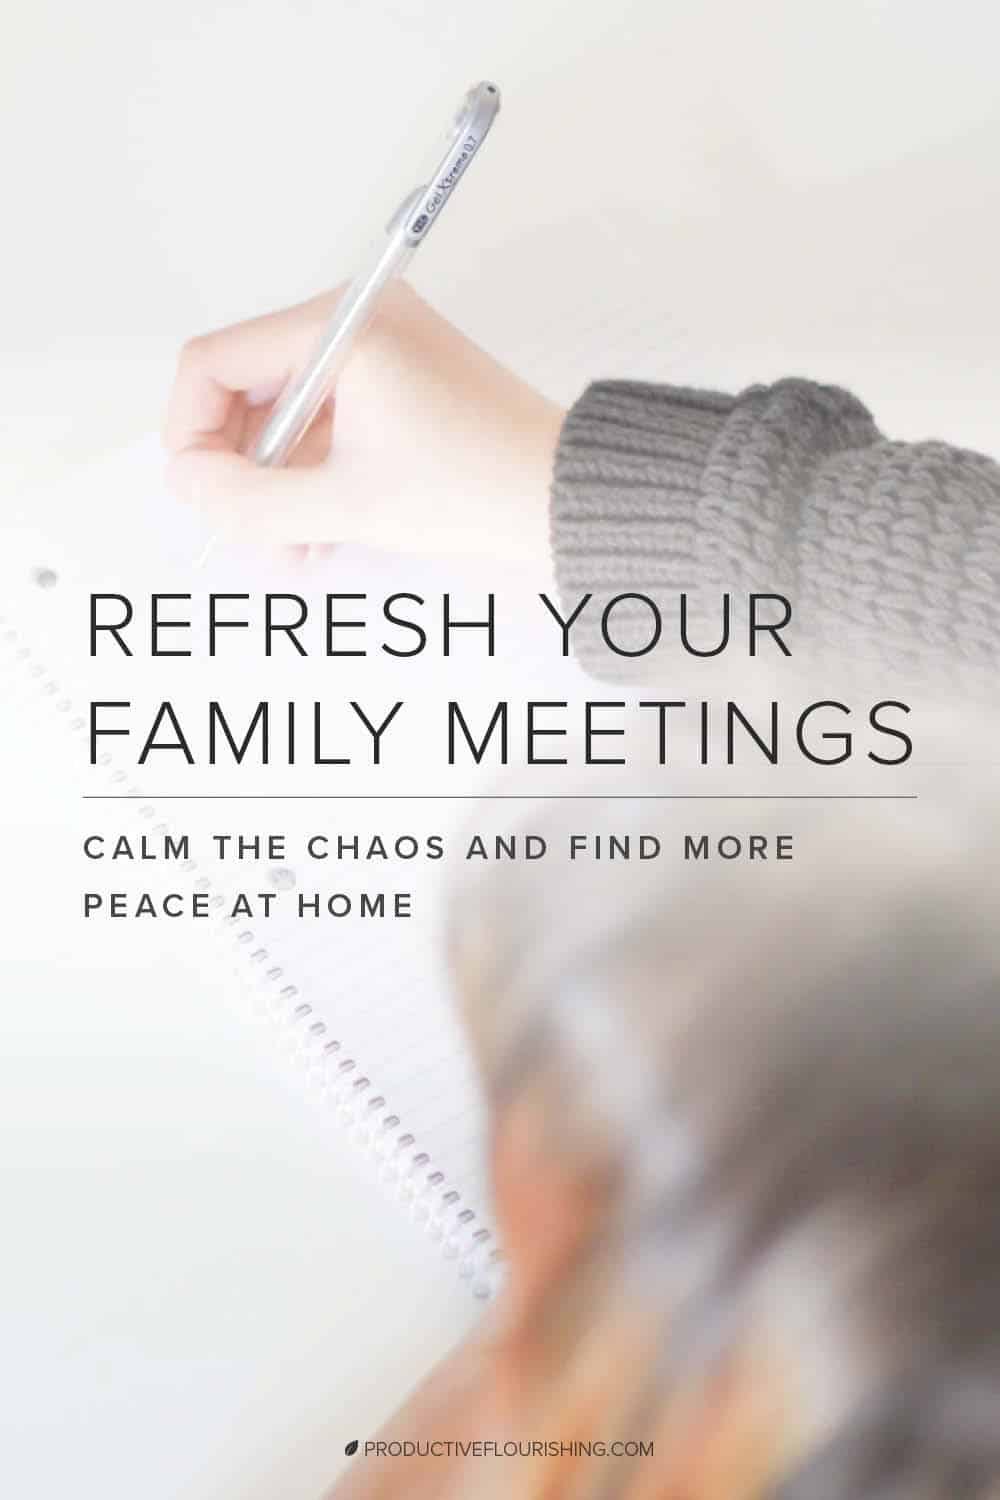 Three ways you can calm the chaos and find more peace at home with a family scrum (meeting). #familyplanning #productivity #productiveflourishing